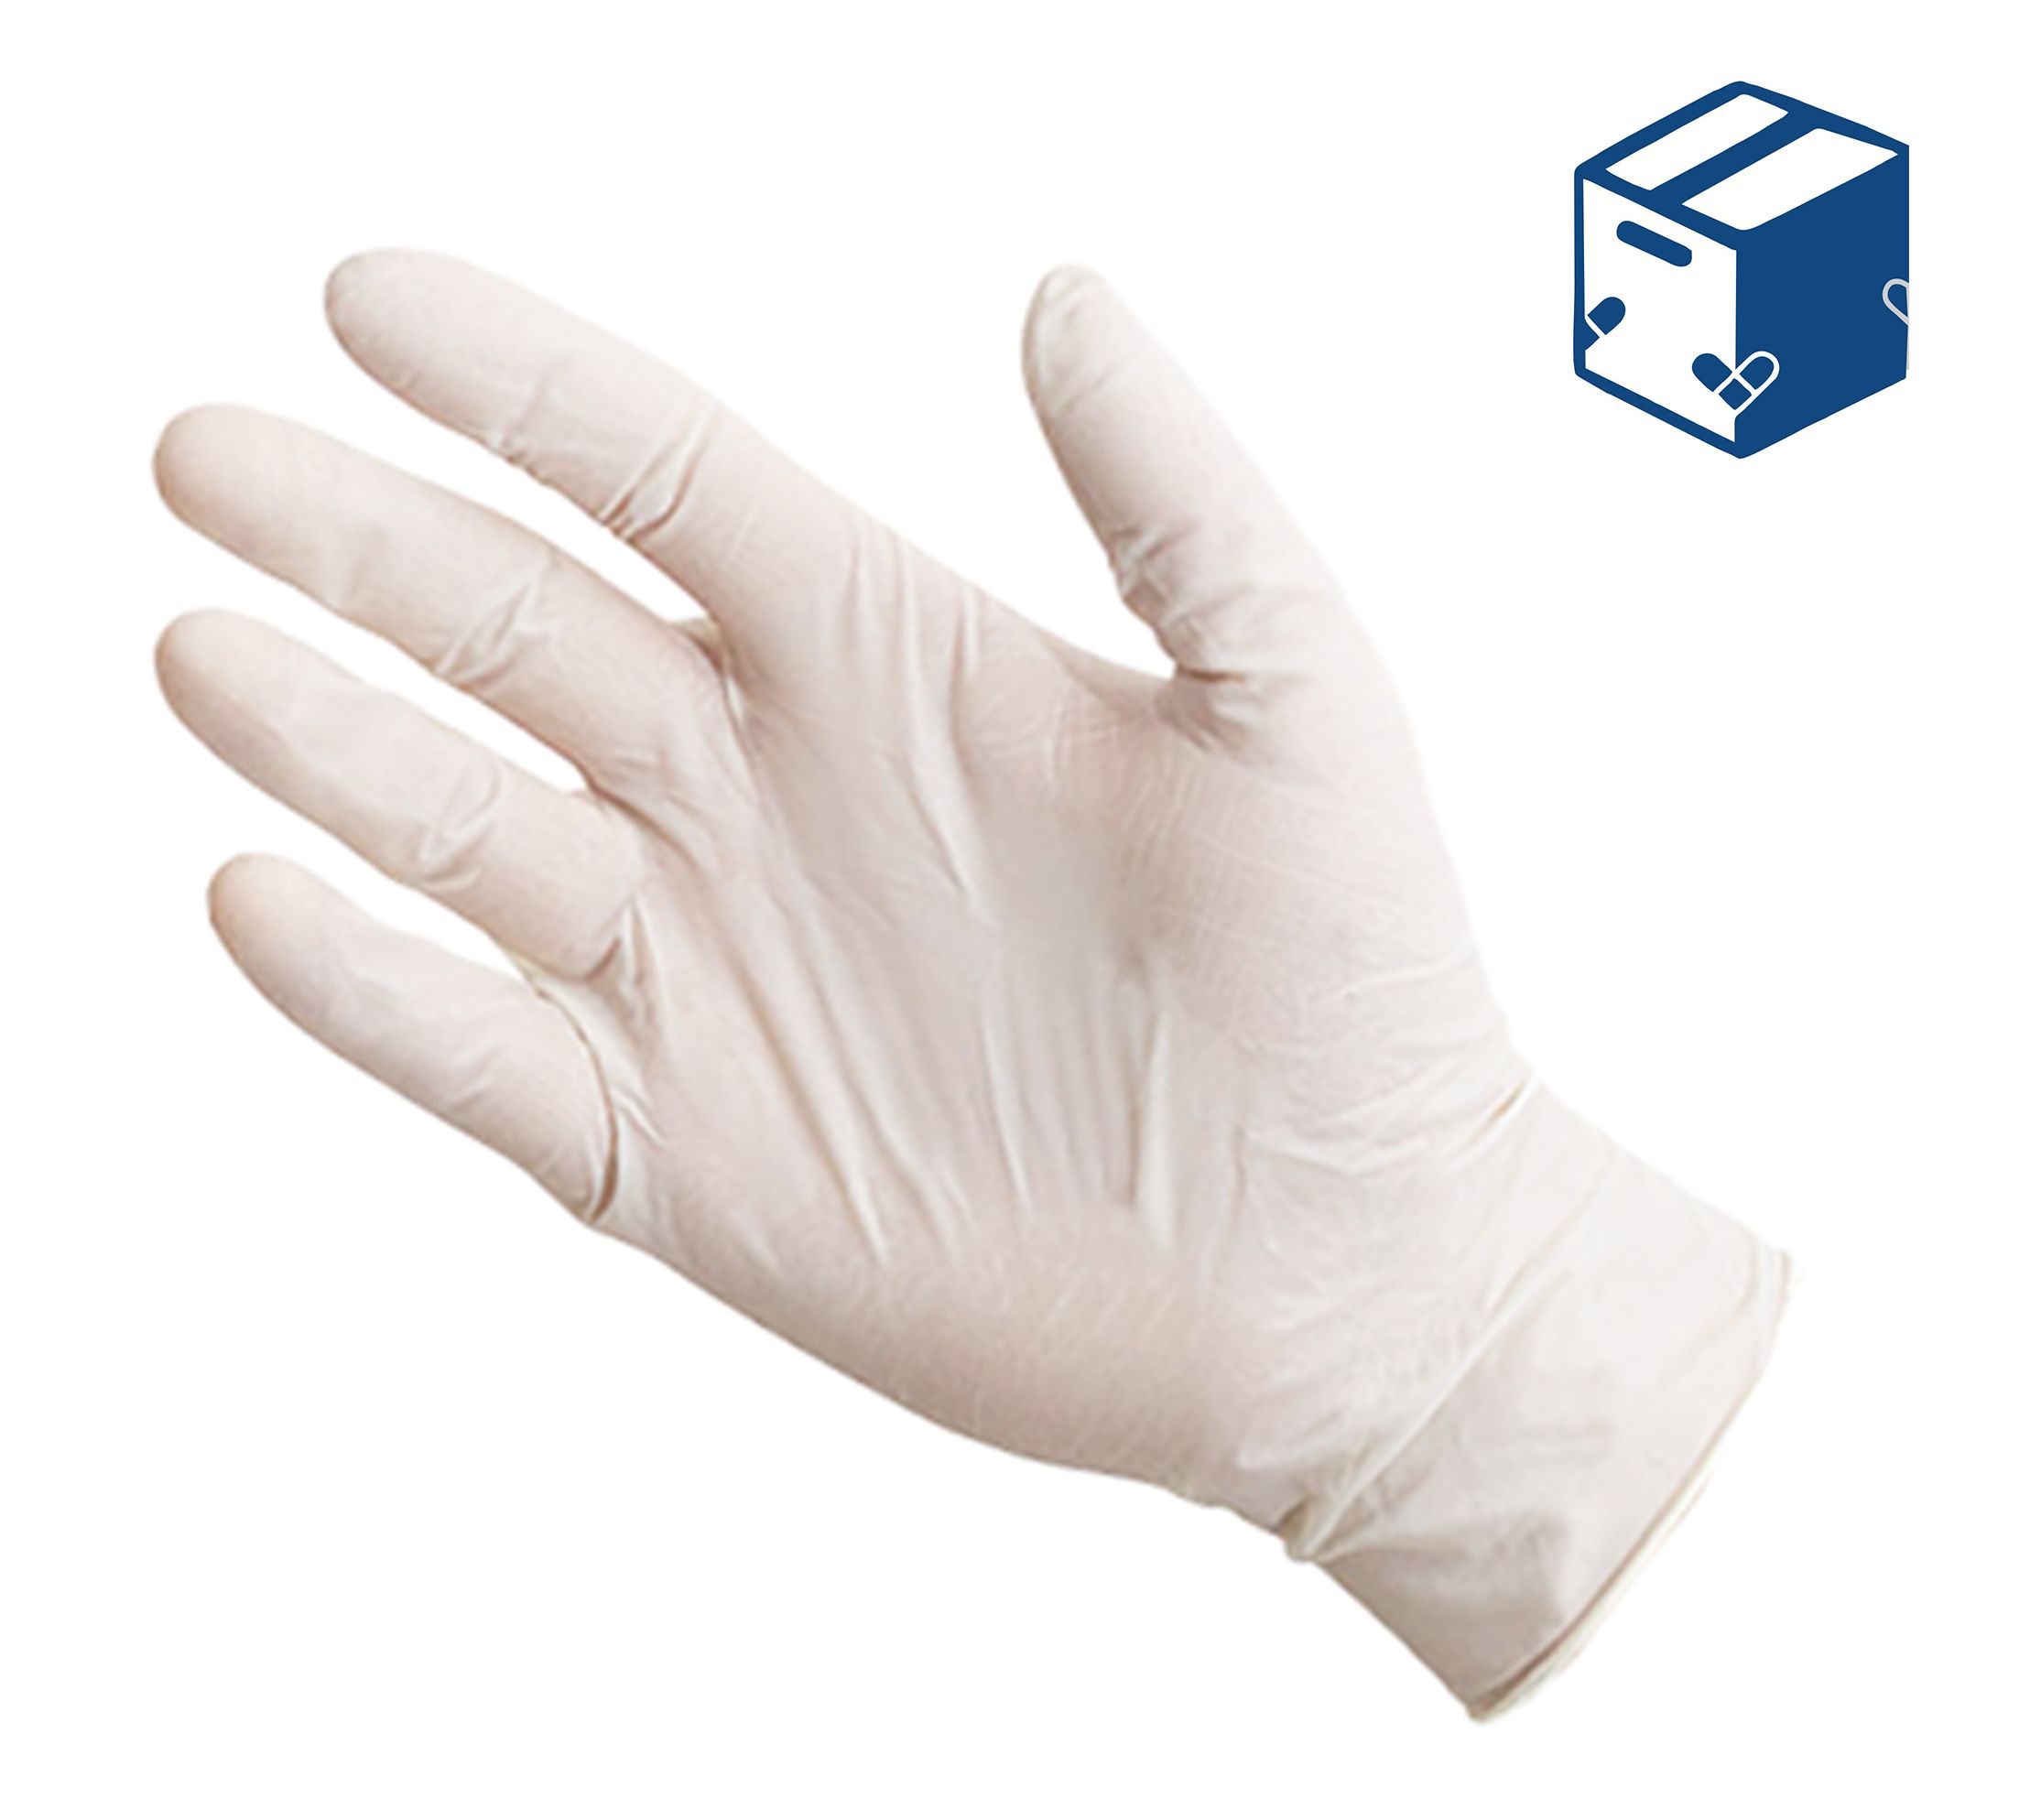 Black,Empty,Nitrile,Protective,Glove,Isolated,On,White